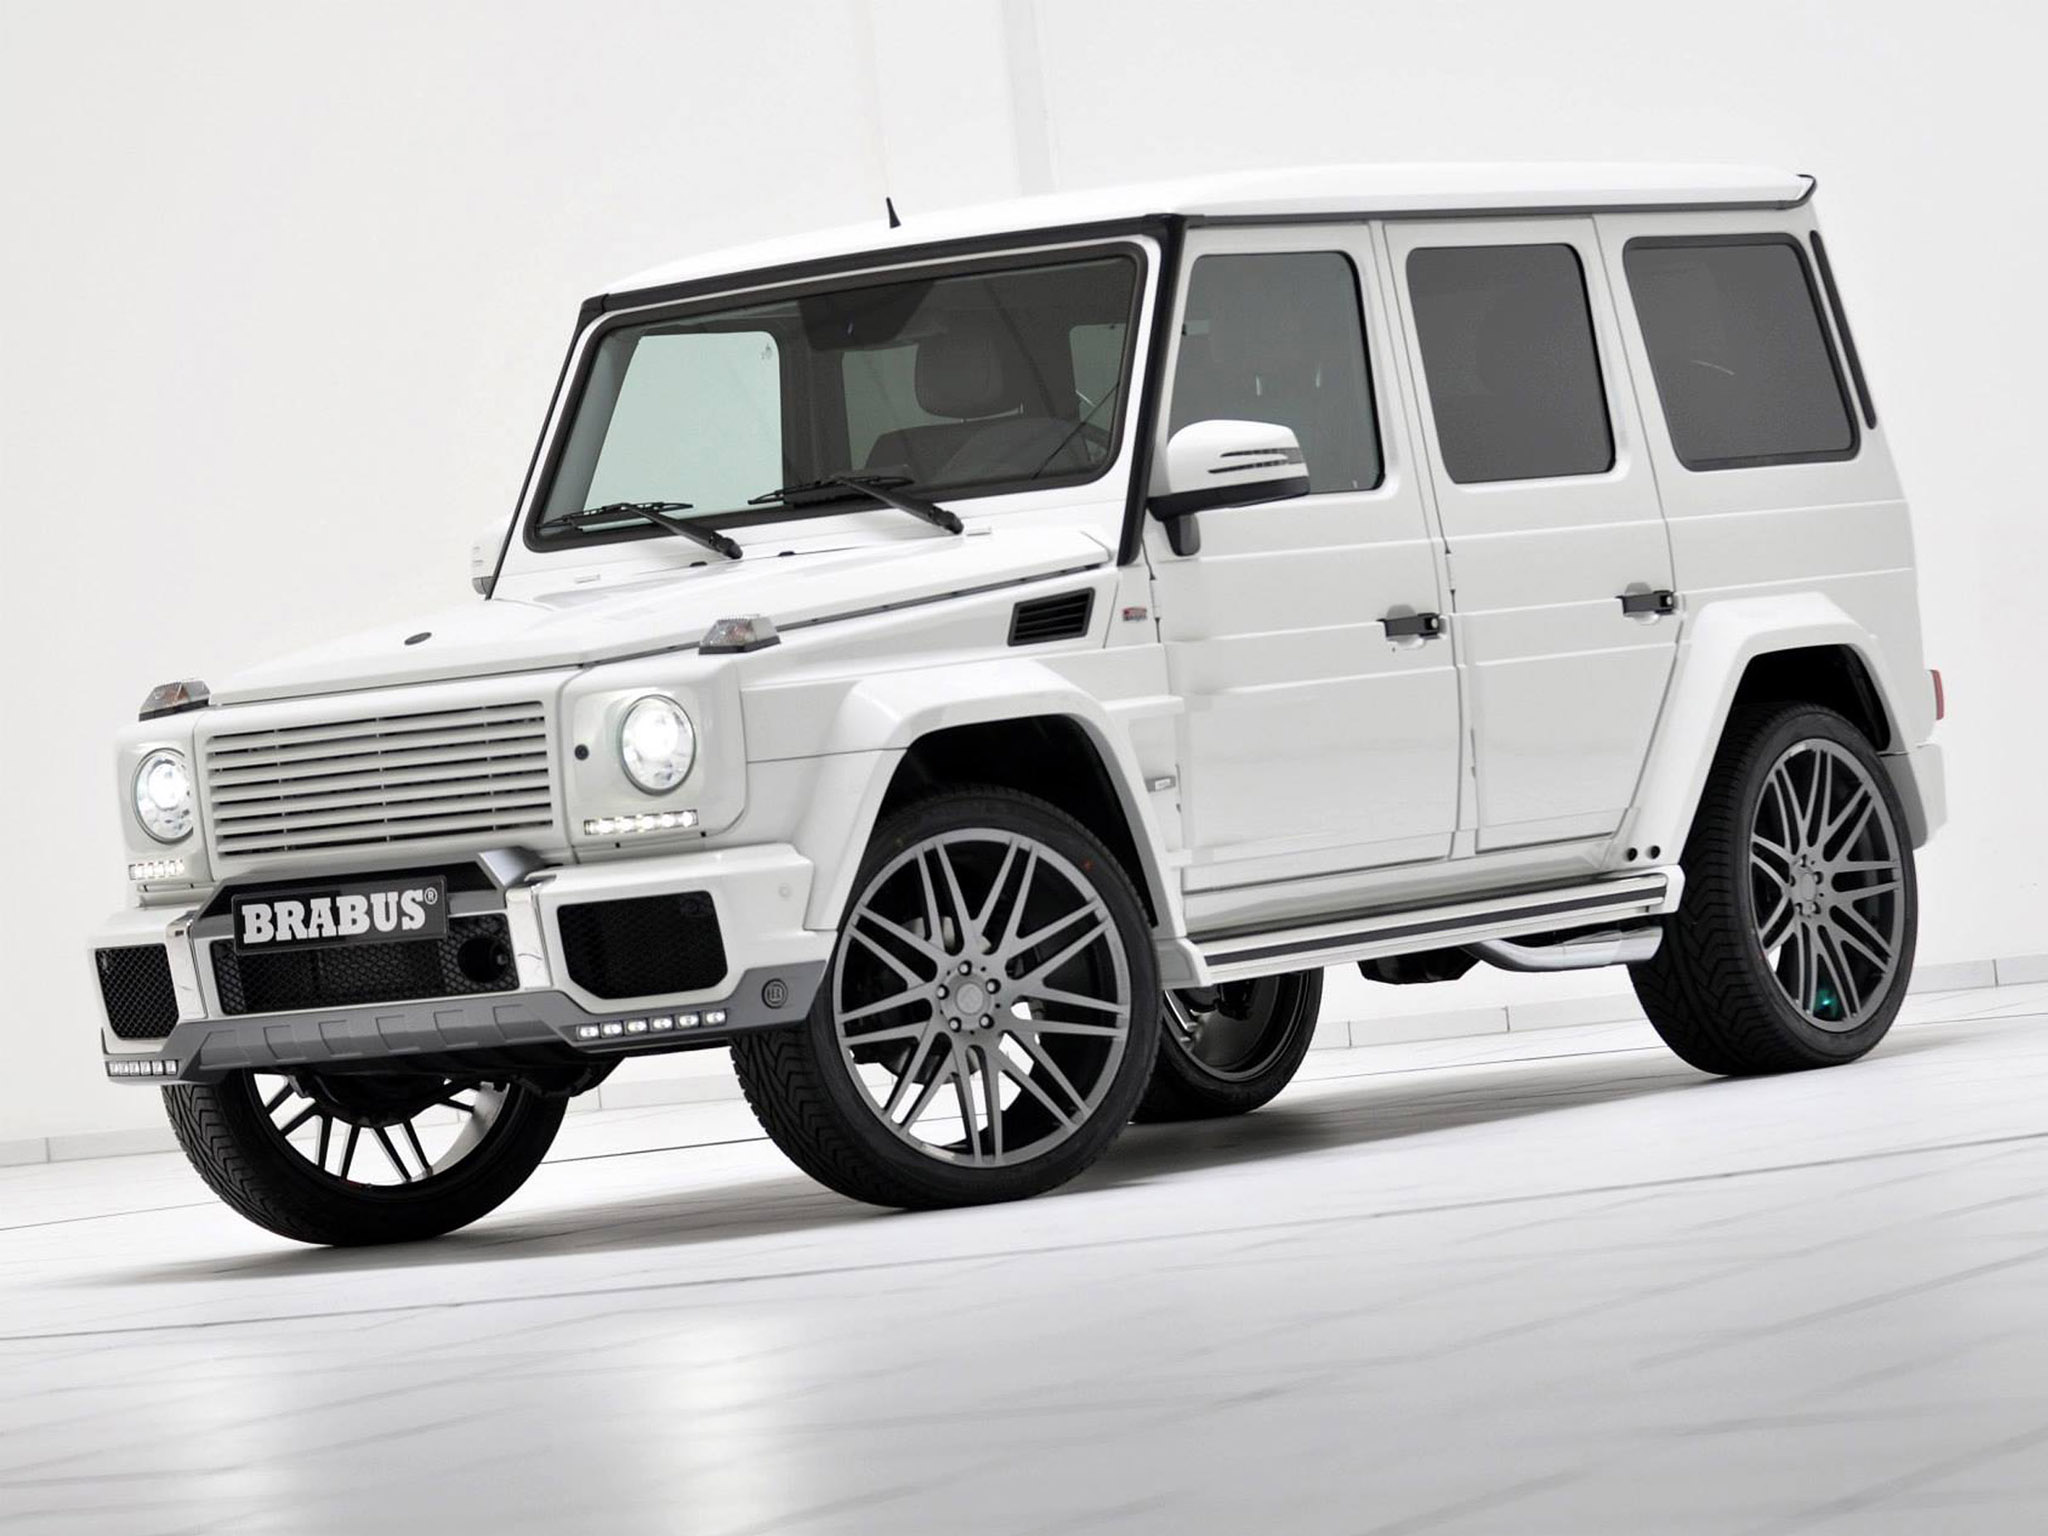 13 Brabus Widestar Mercedes Benz G Class 350 Cdi Suv Tuning Wallpapers Hd Desktop And Mobile Backgrounds